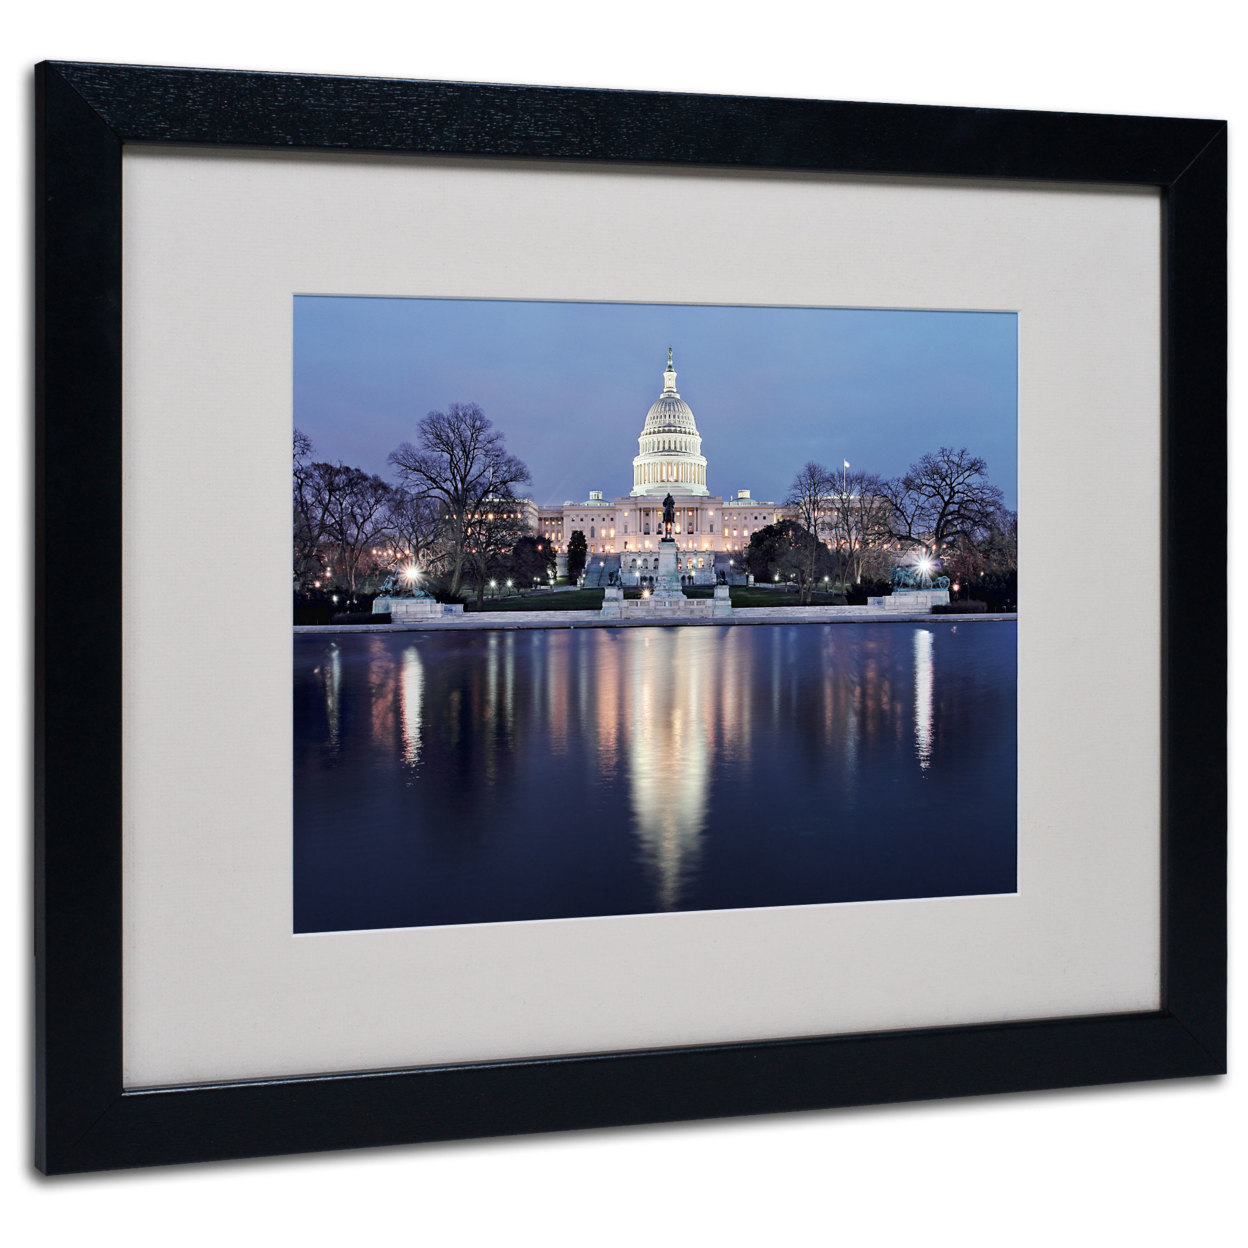 Gregory O'Hanlon 'Capitol Reflections' Black Wooden Framed Art 18 X 22 Inches